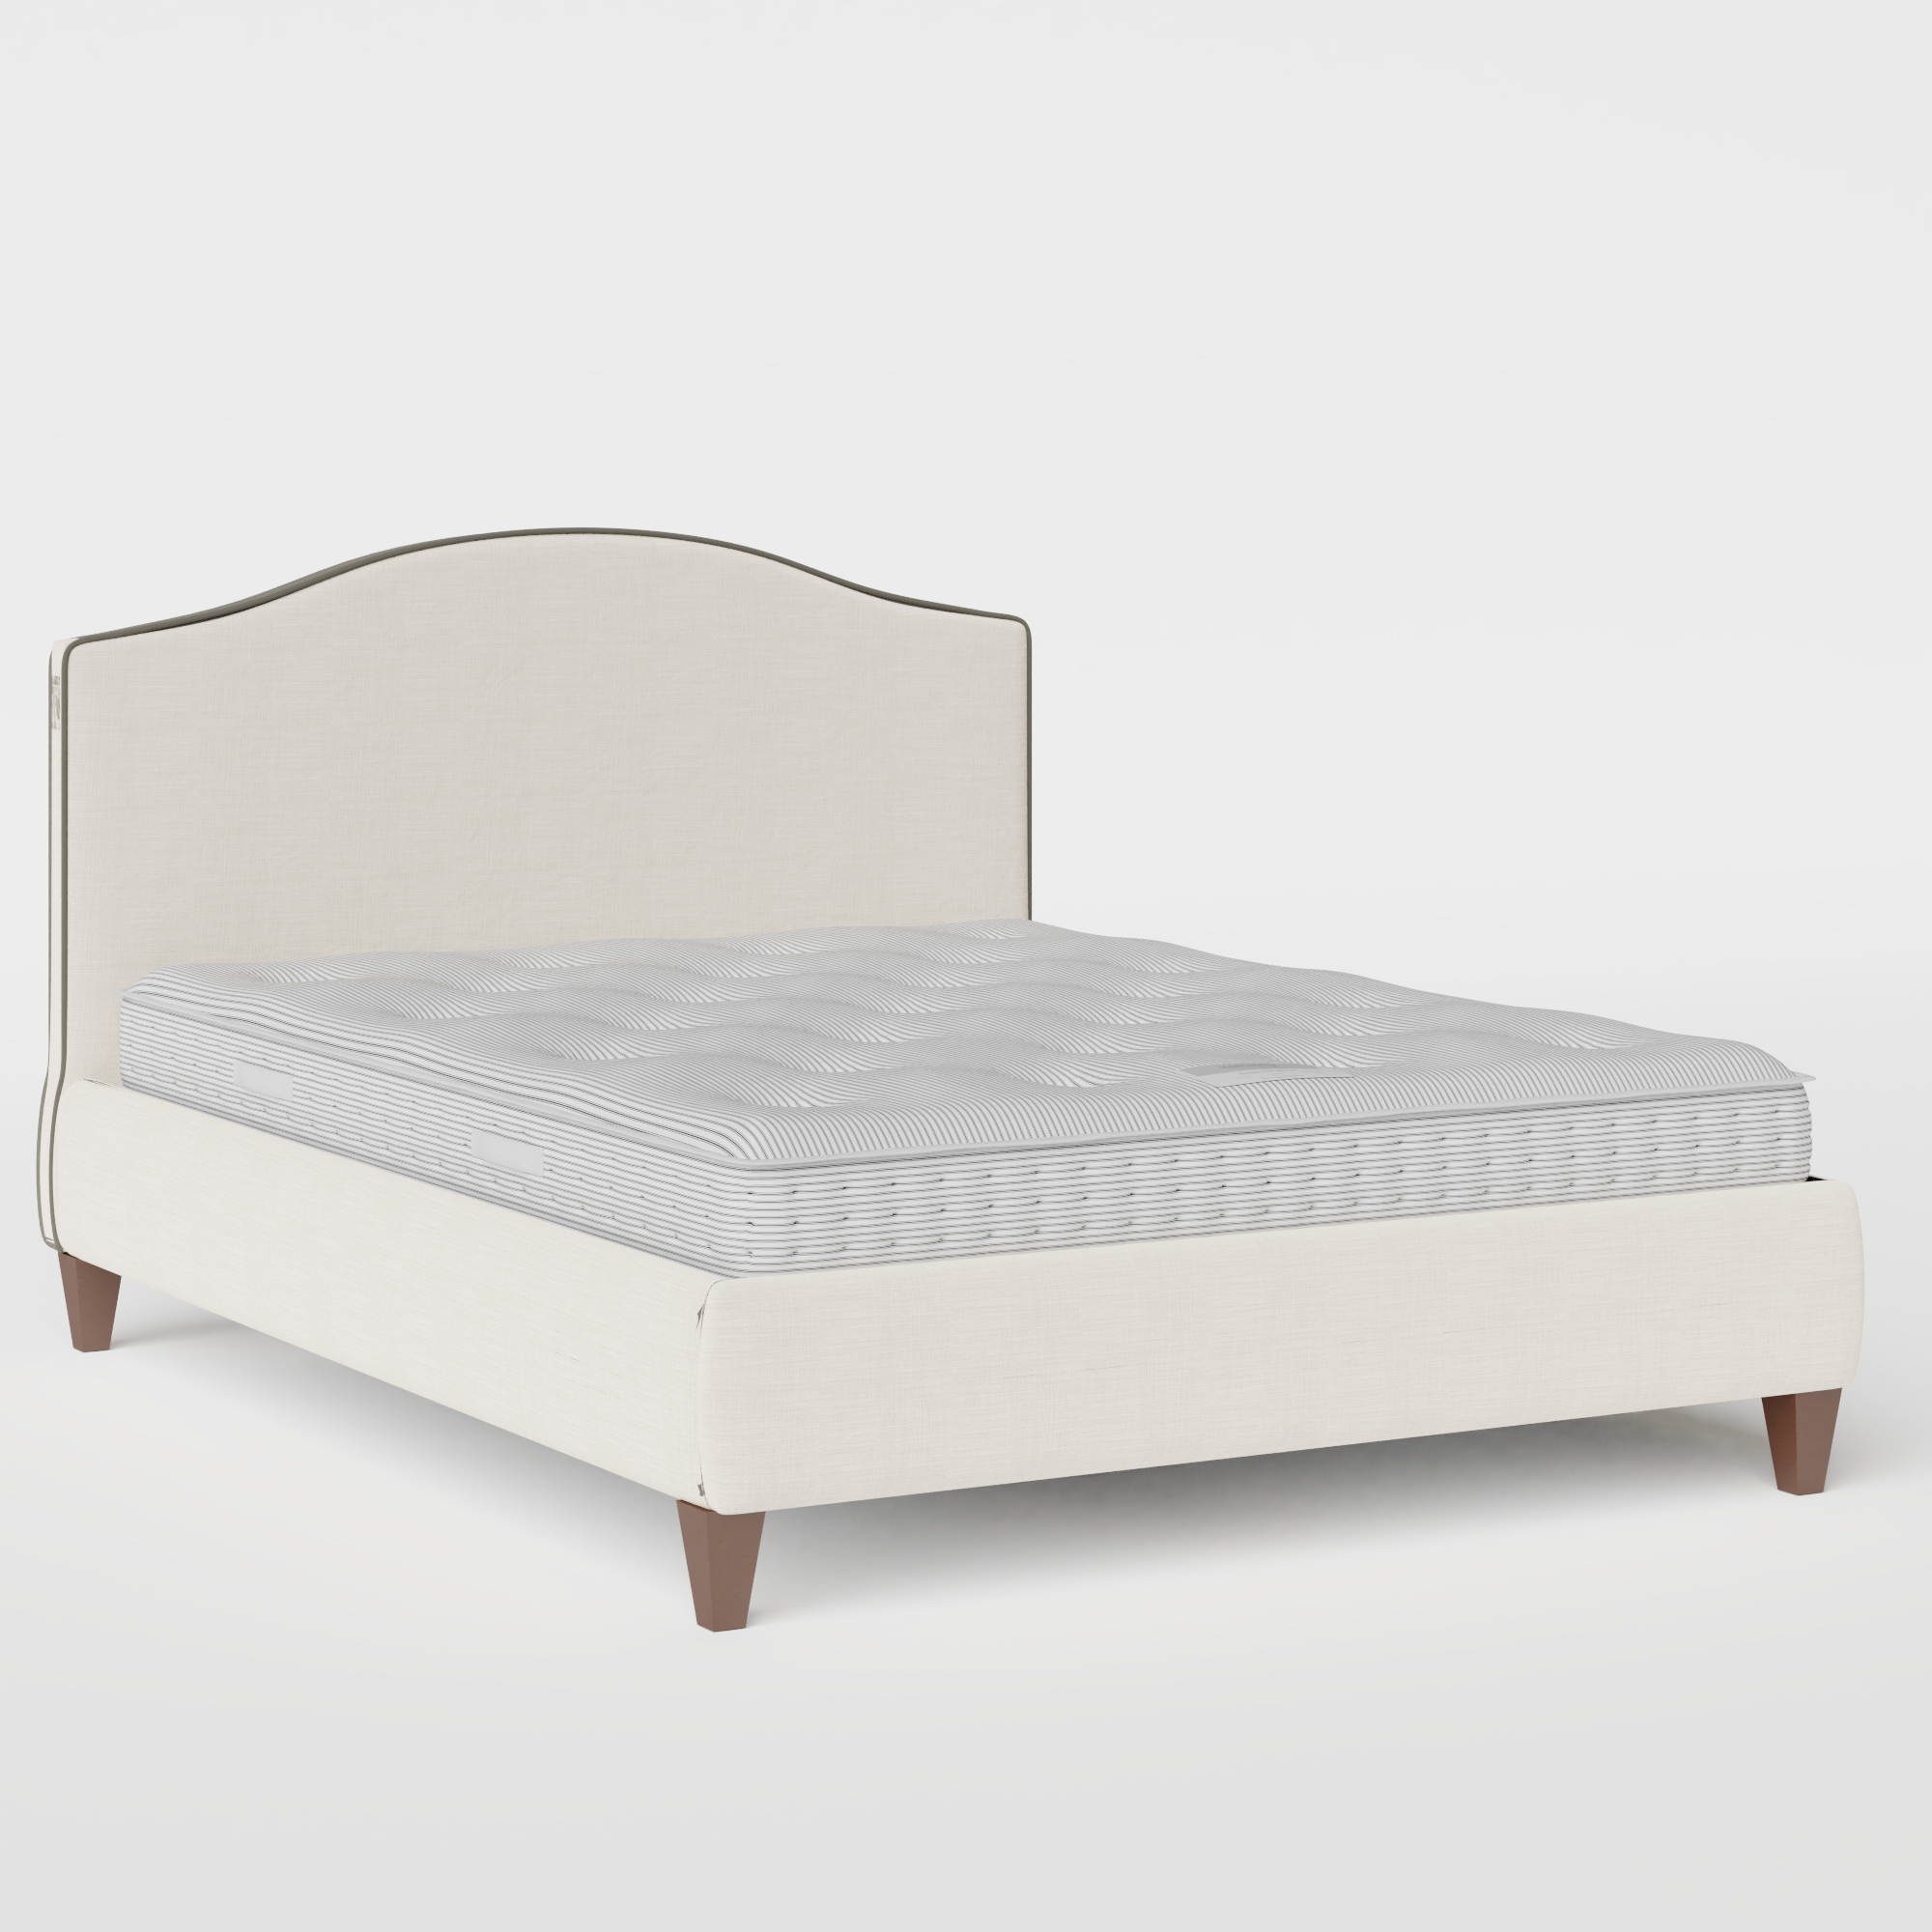 Daniella with Piping stoffen bed in mist